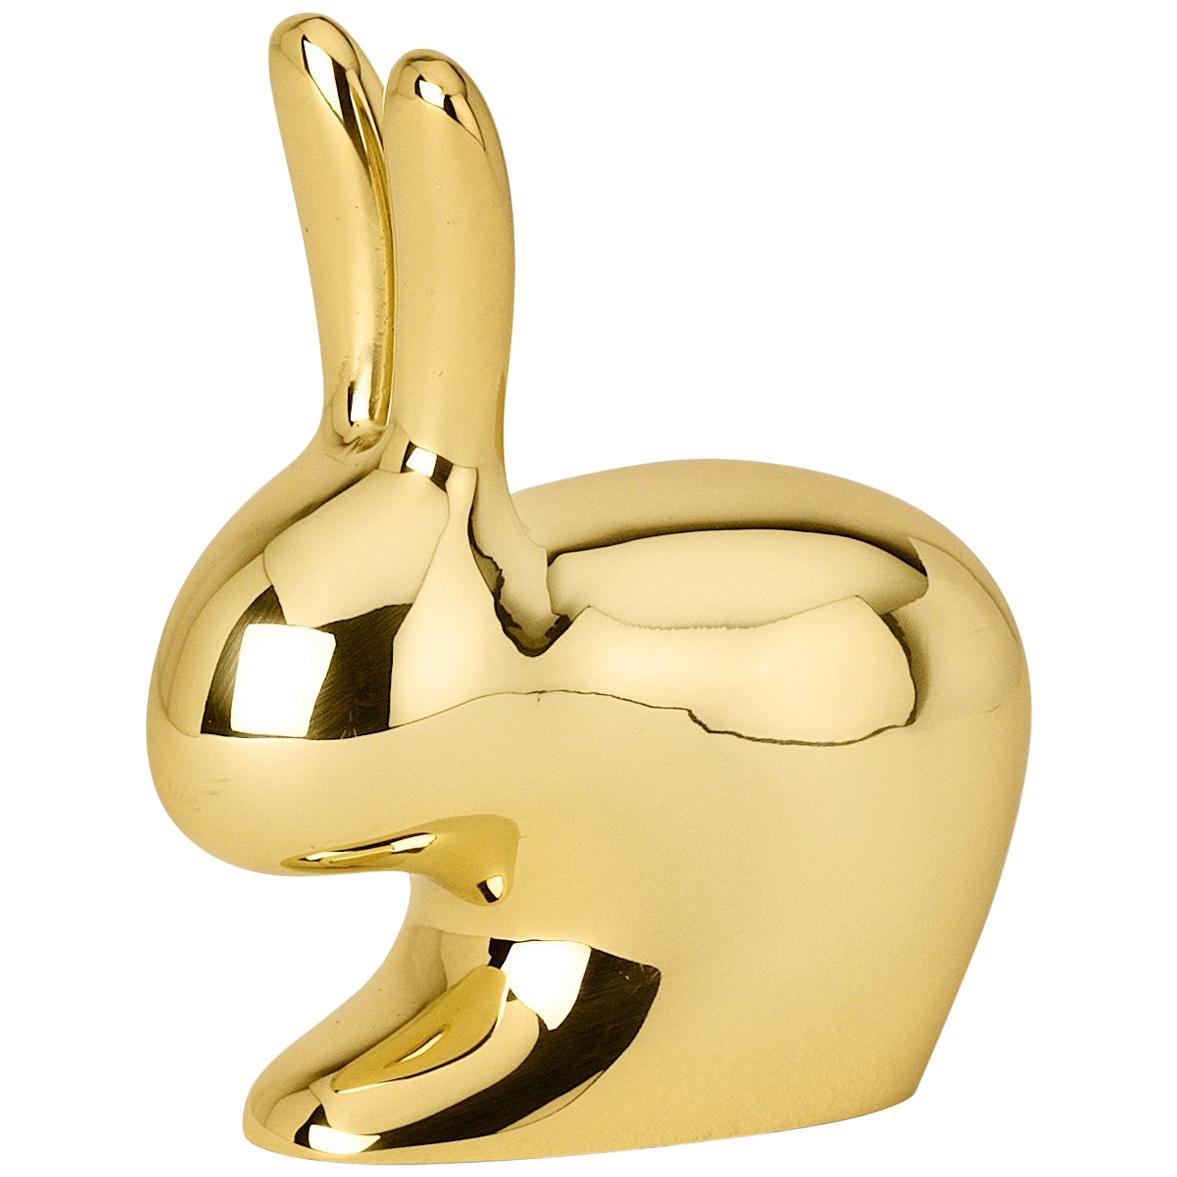 Ghidini 1961 Small Rabbit in Polished Brass by Stefano Giovannoni For Sale